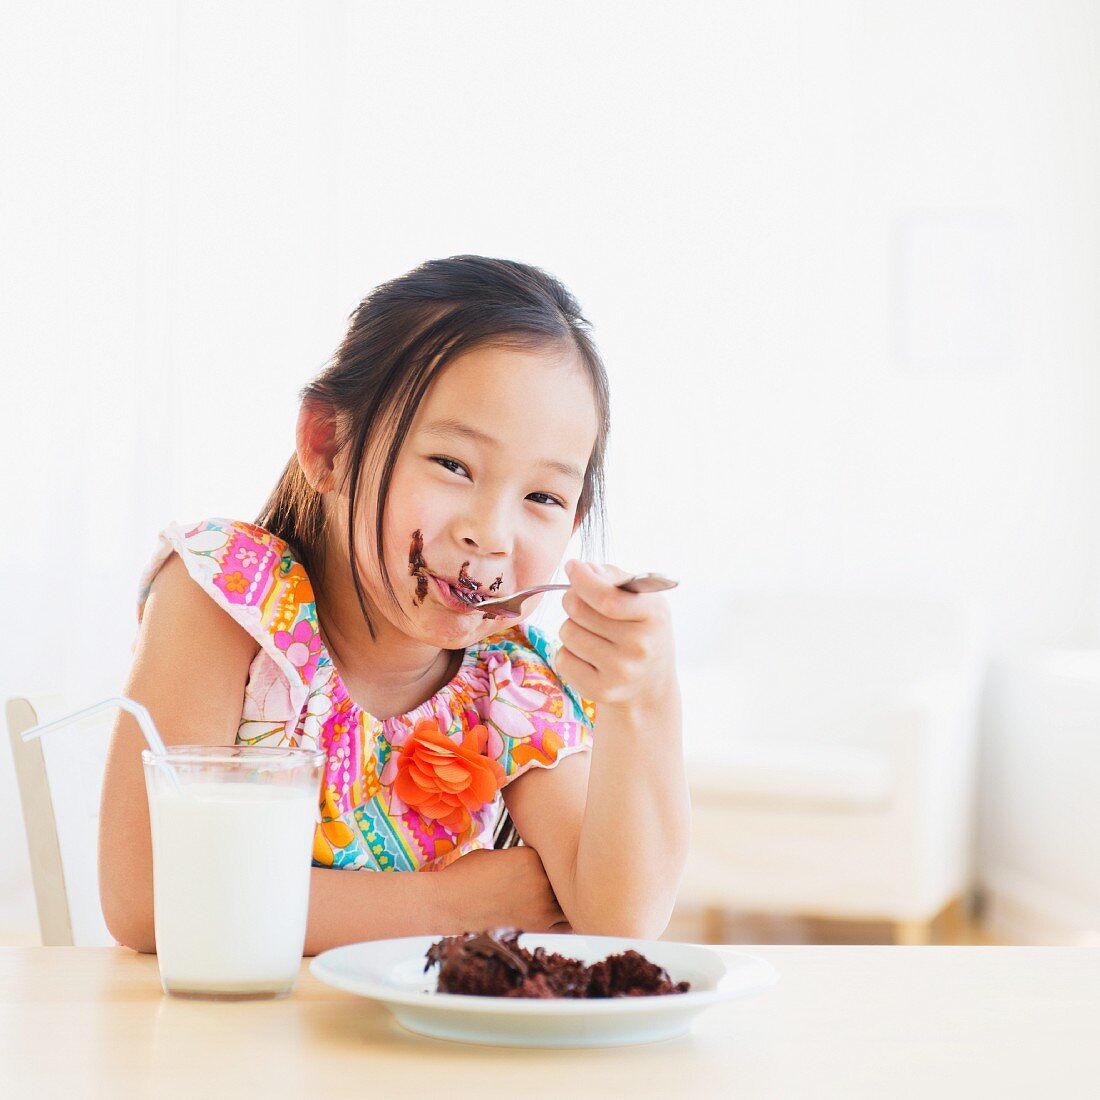 A little girl eating a slice of chocolate cake